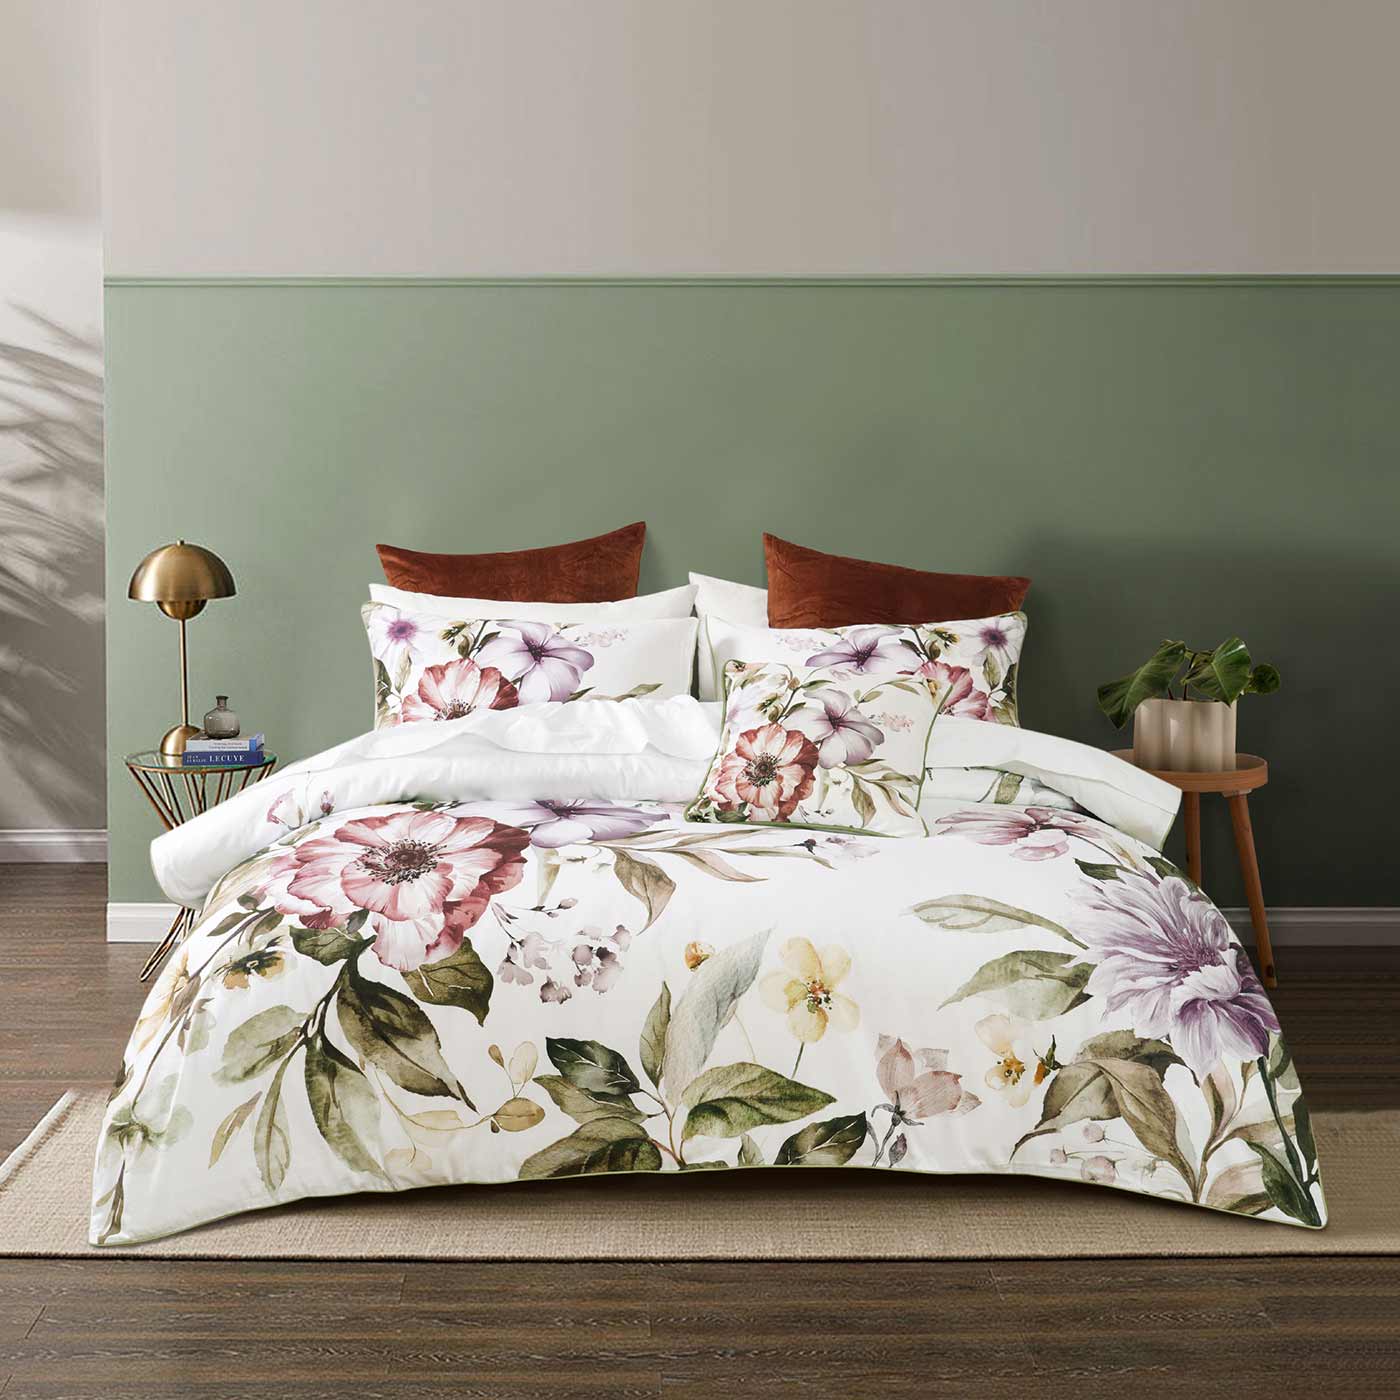 A beautiful free flowing floral design in tones of deep terracotta, mauve and green contrasted on a white background evoke a calming space. Printed on soft cotton sateen fabric and finished with a piped edge Minette is definitely a quilt cover for any home.